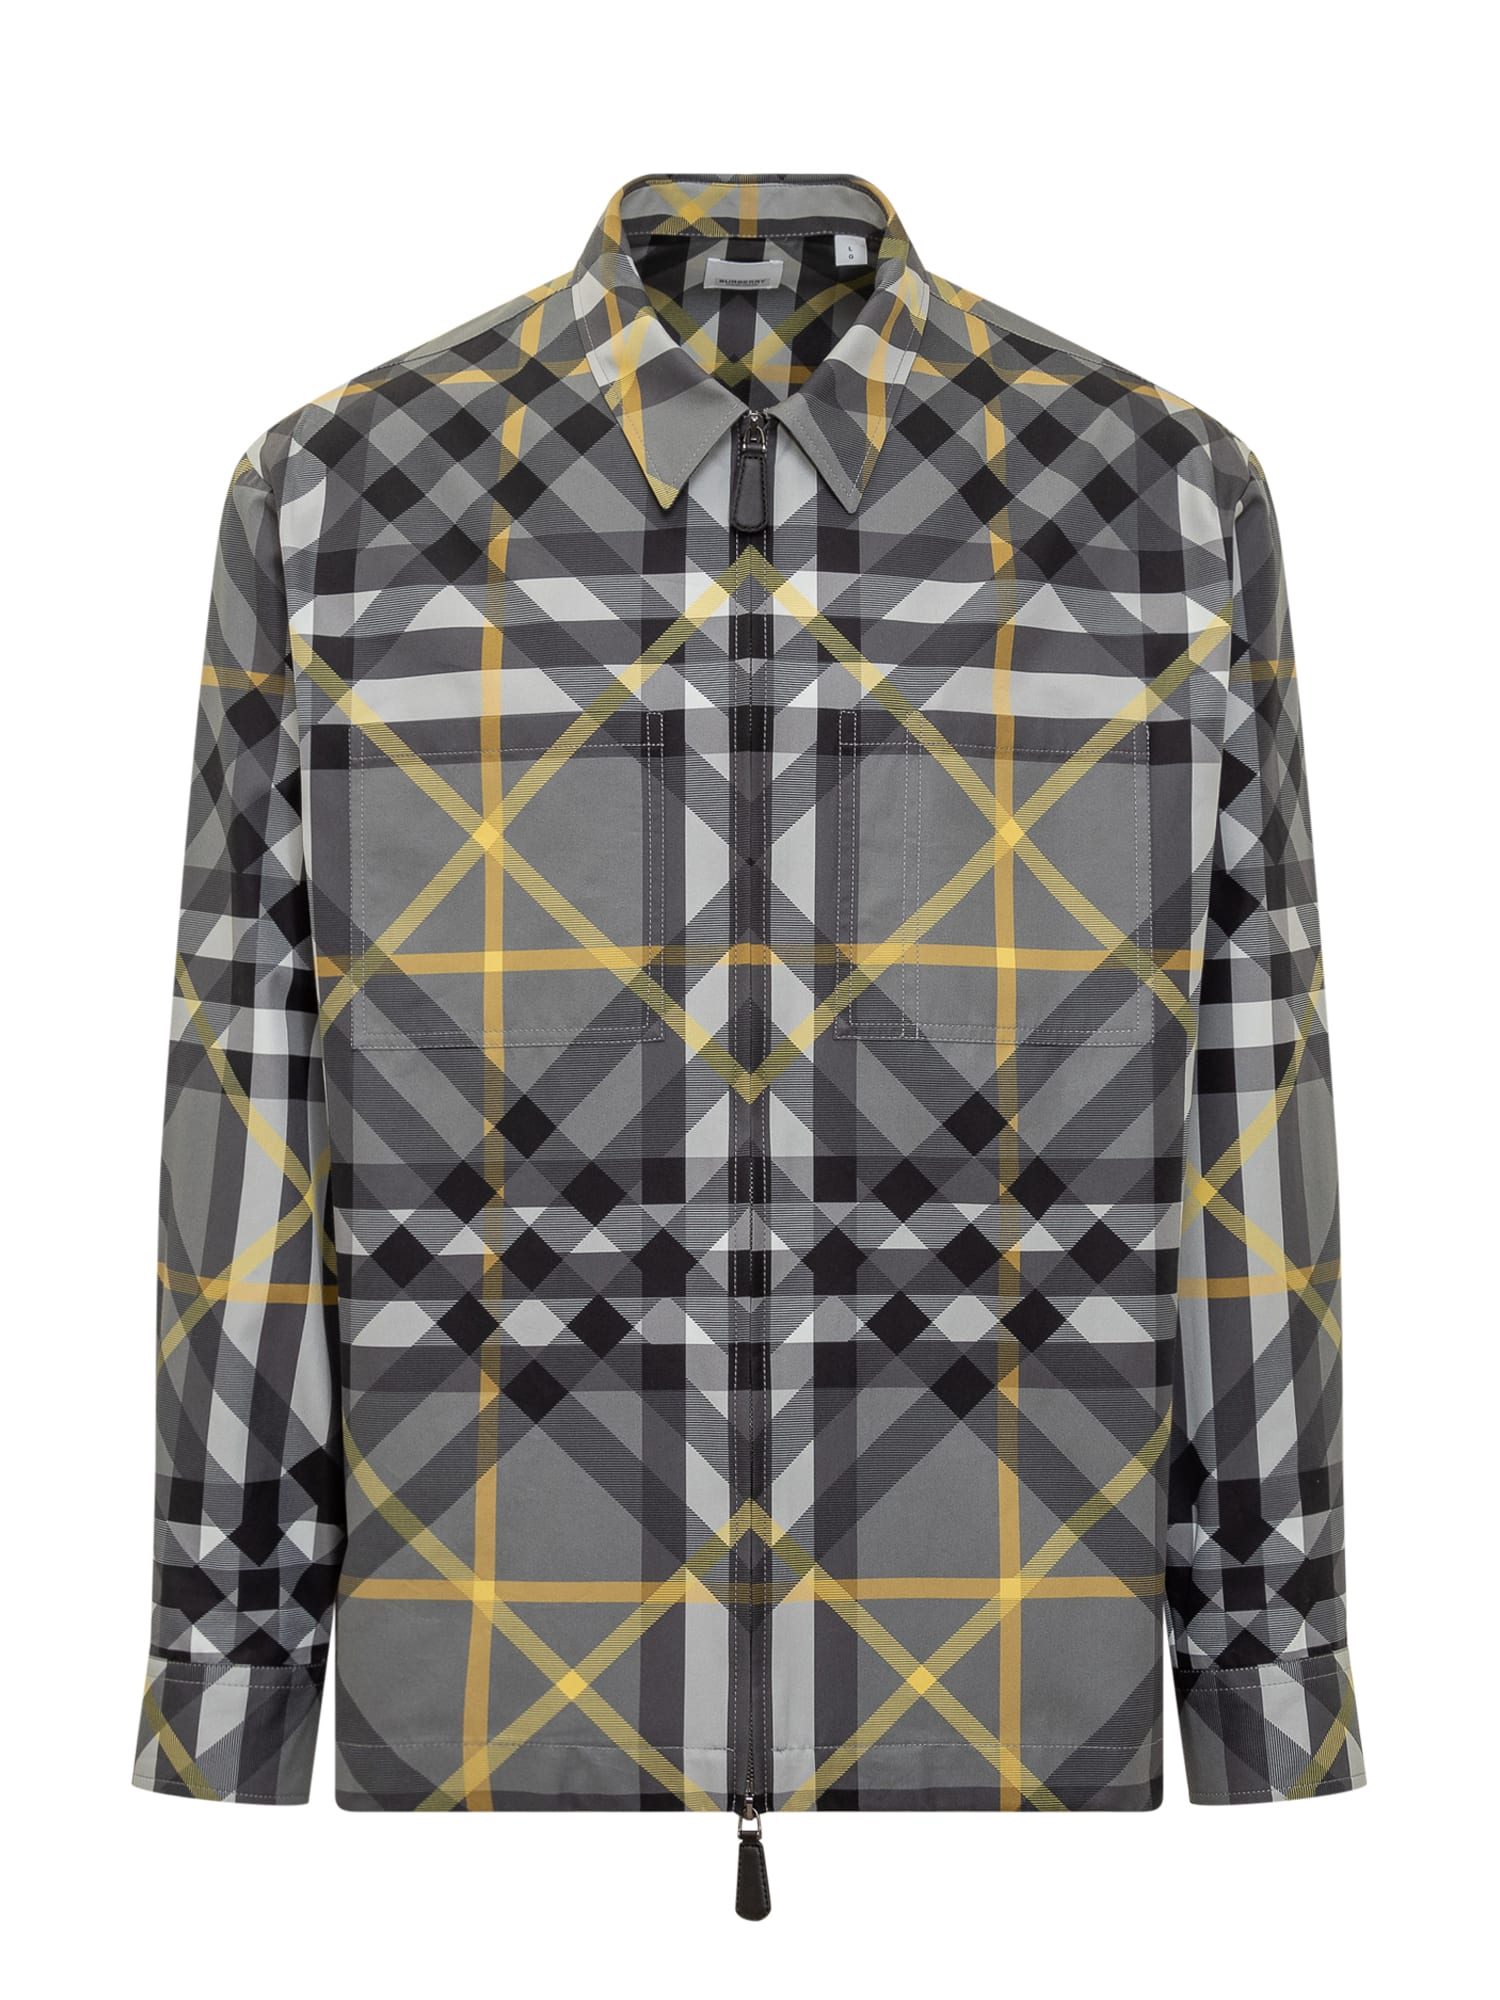 BURBERRY EXAGGERATED CHECK SHIRT